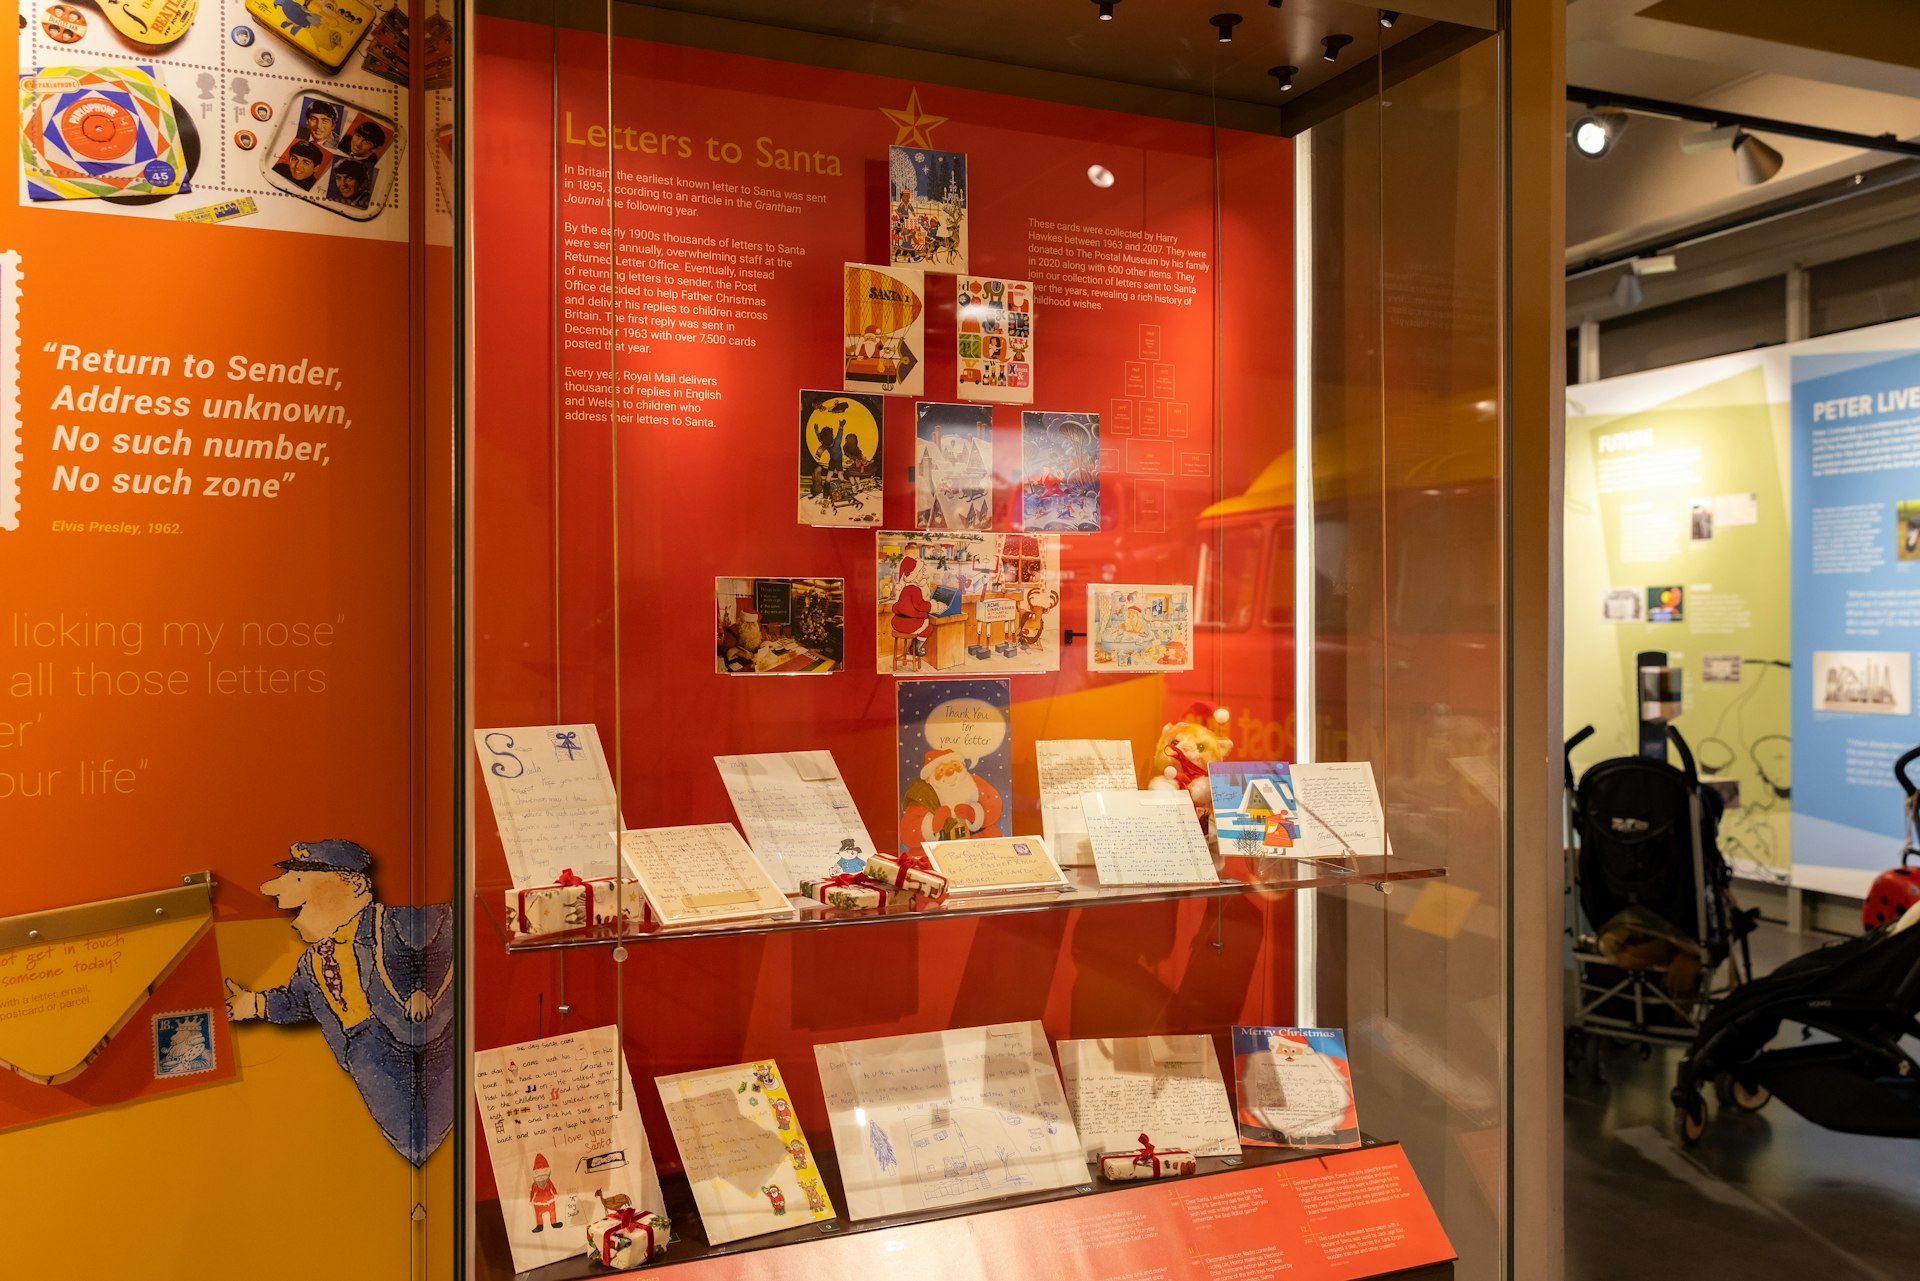 A display of letters written to Santa Claus at the Postal Museum